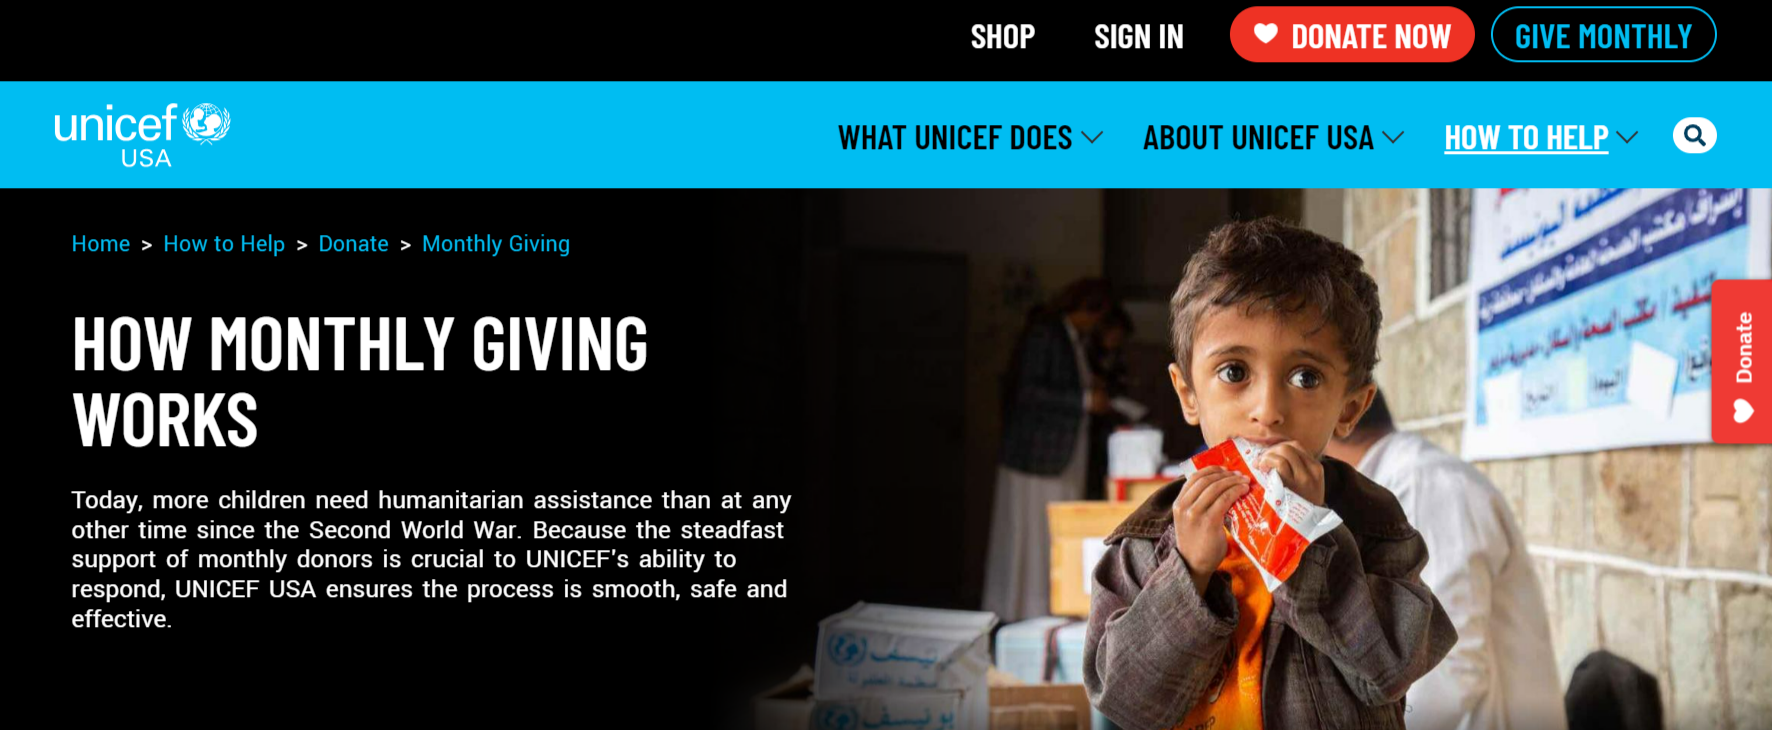 Unicef’s recurring giving page, which explains how monthly giving works.